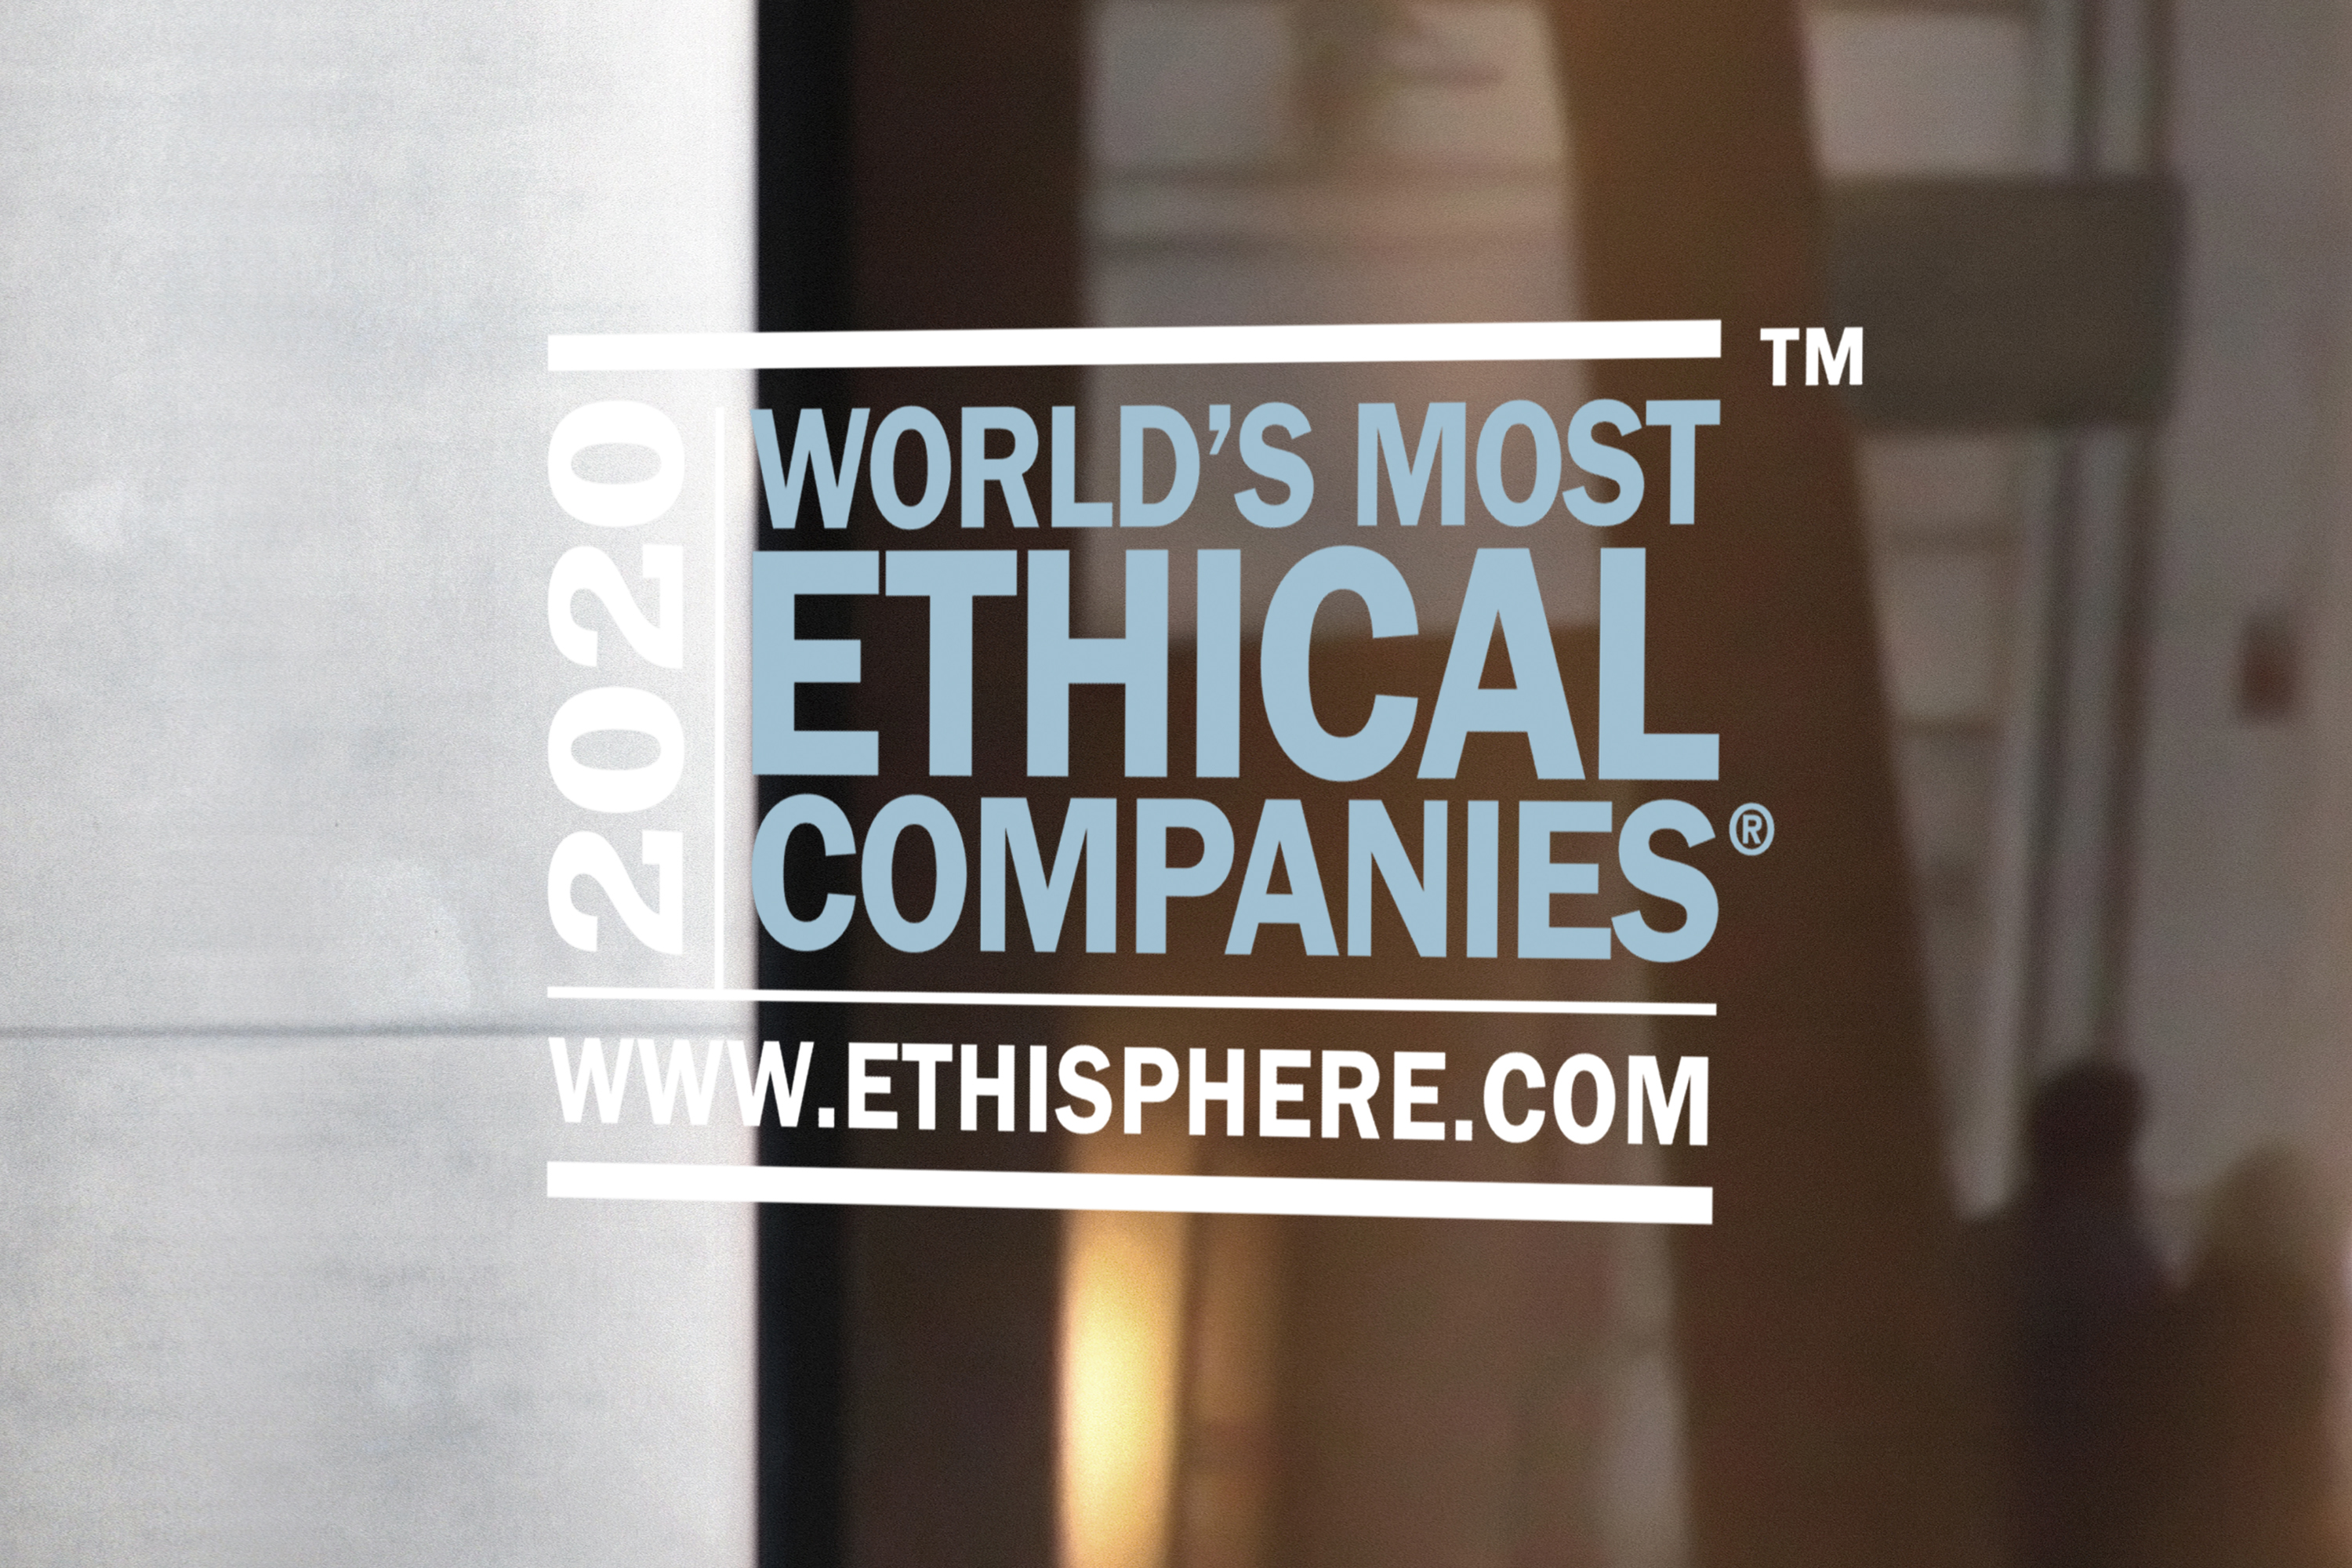 2020 World's Most Ethical Companies™ - www.ethisphere.com